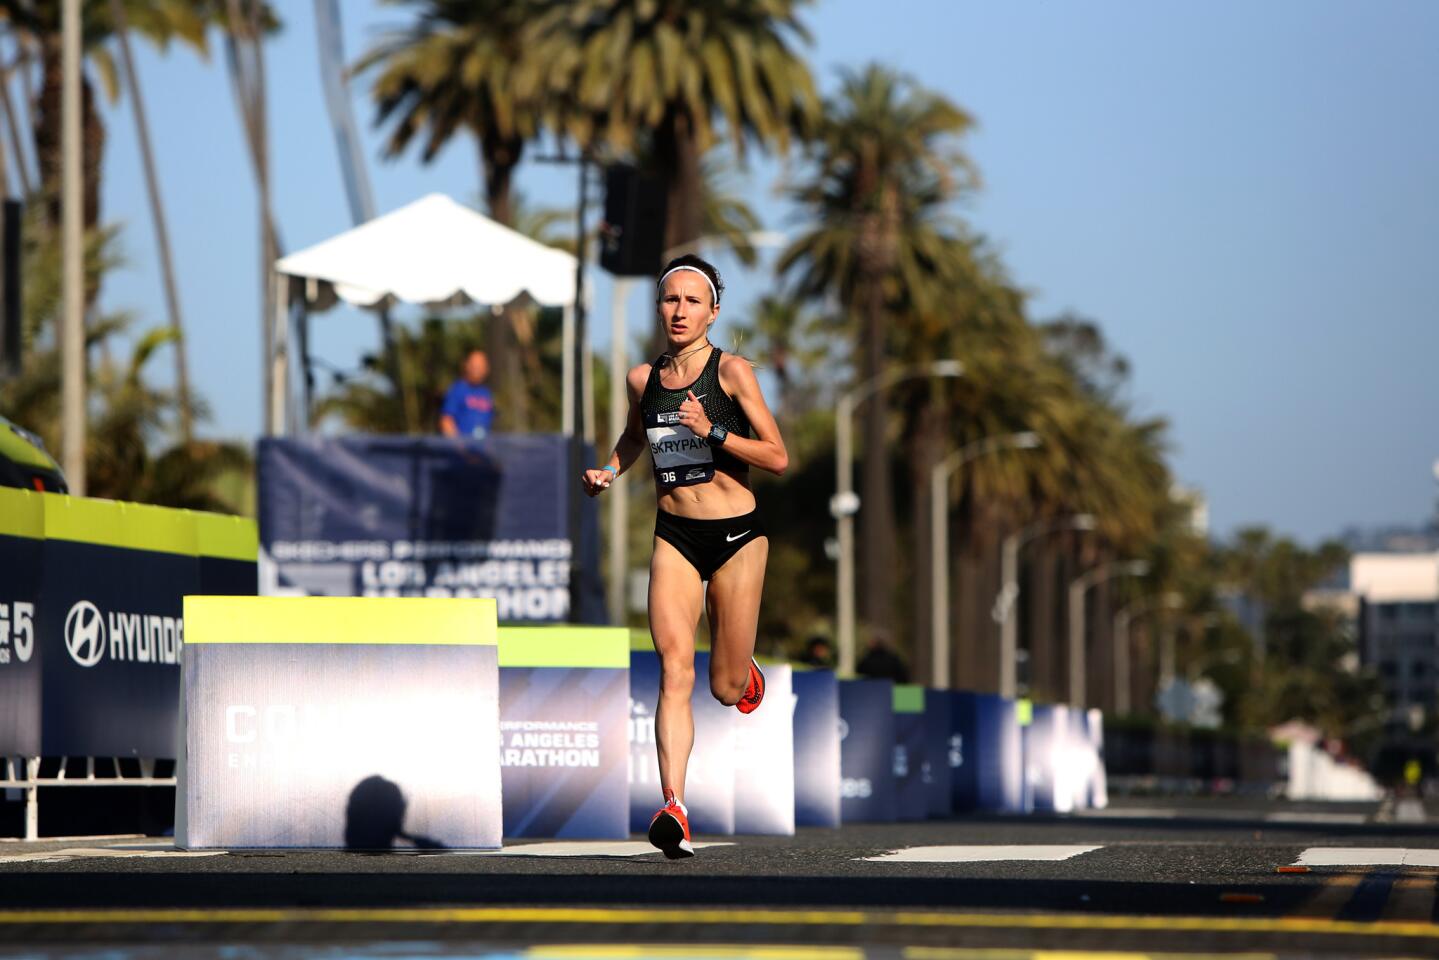 Runner Olha Skrypak finishes in fourth place for female runners during the Los Angeles Marathon on March 24.